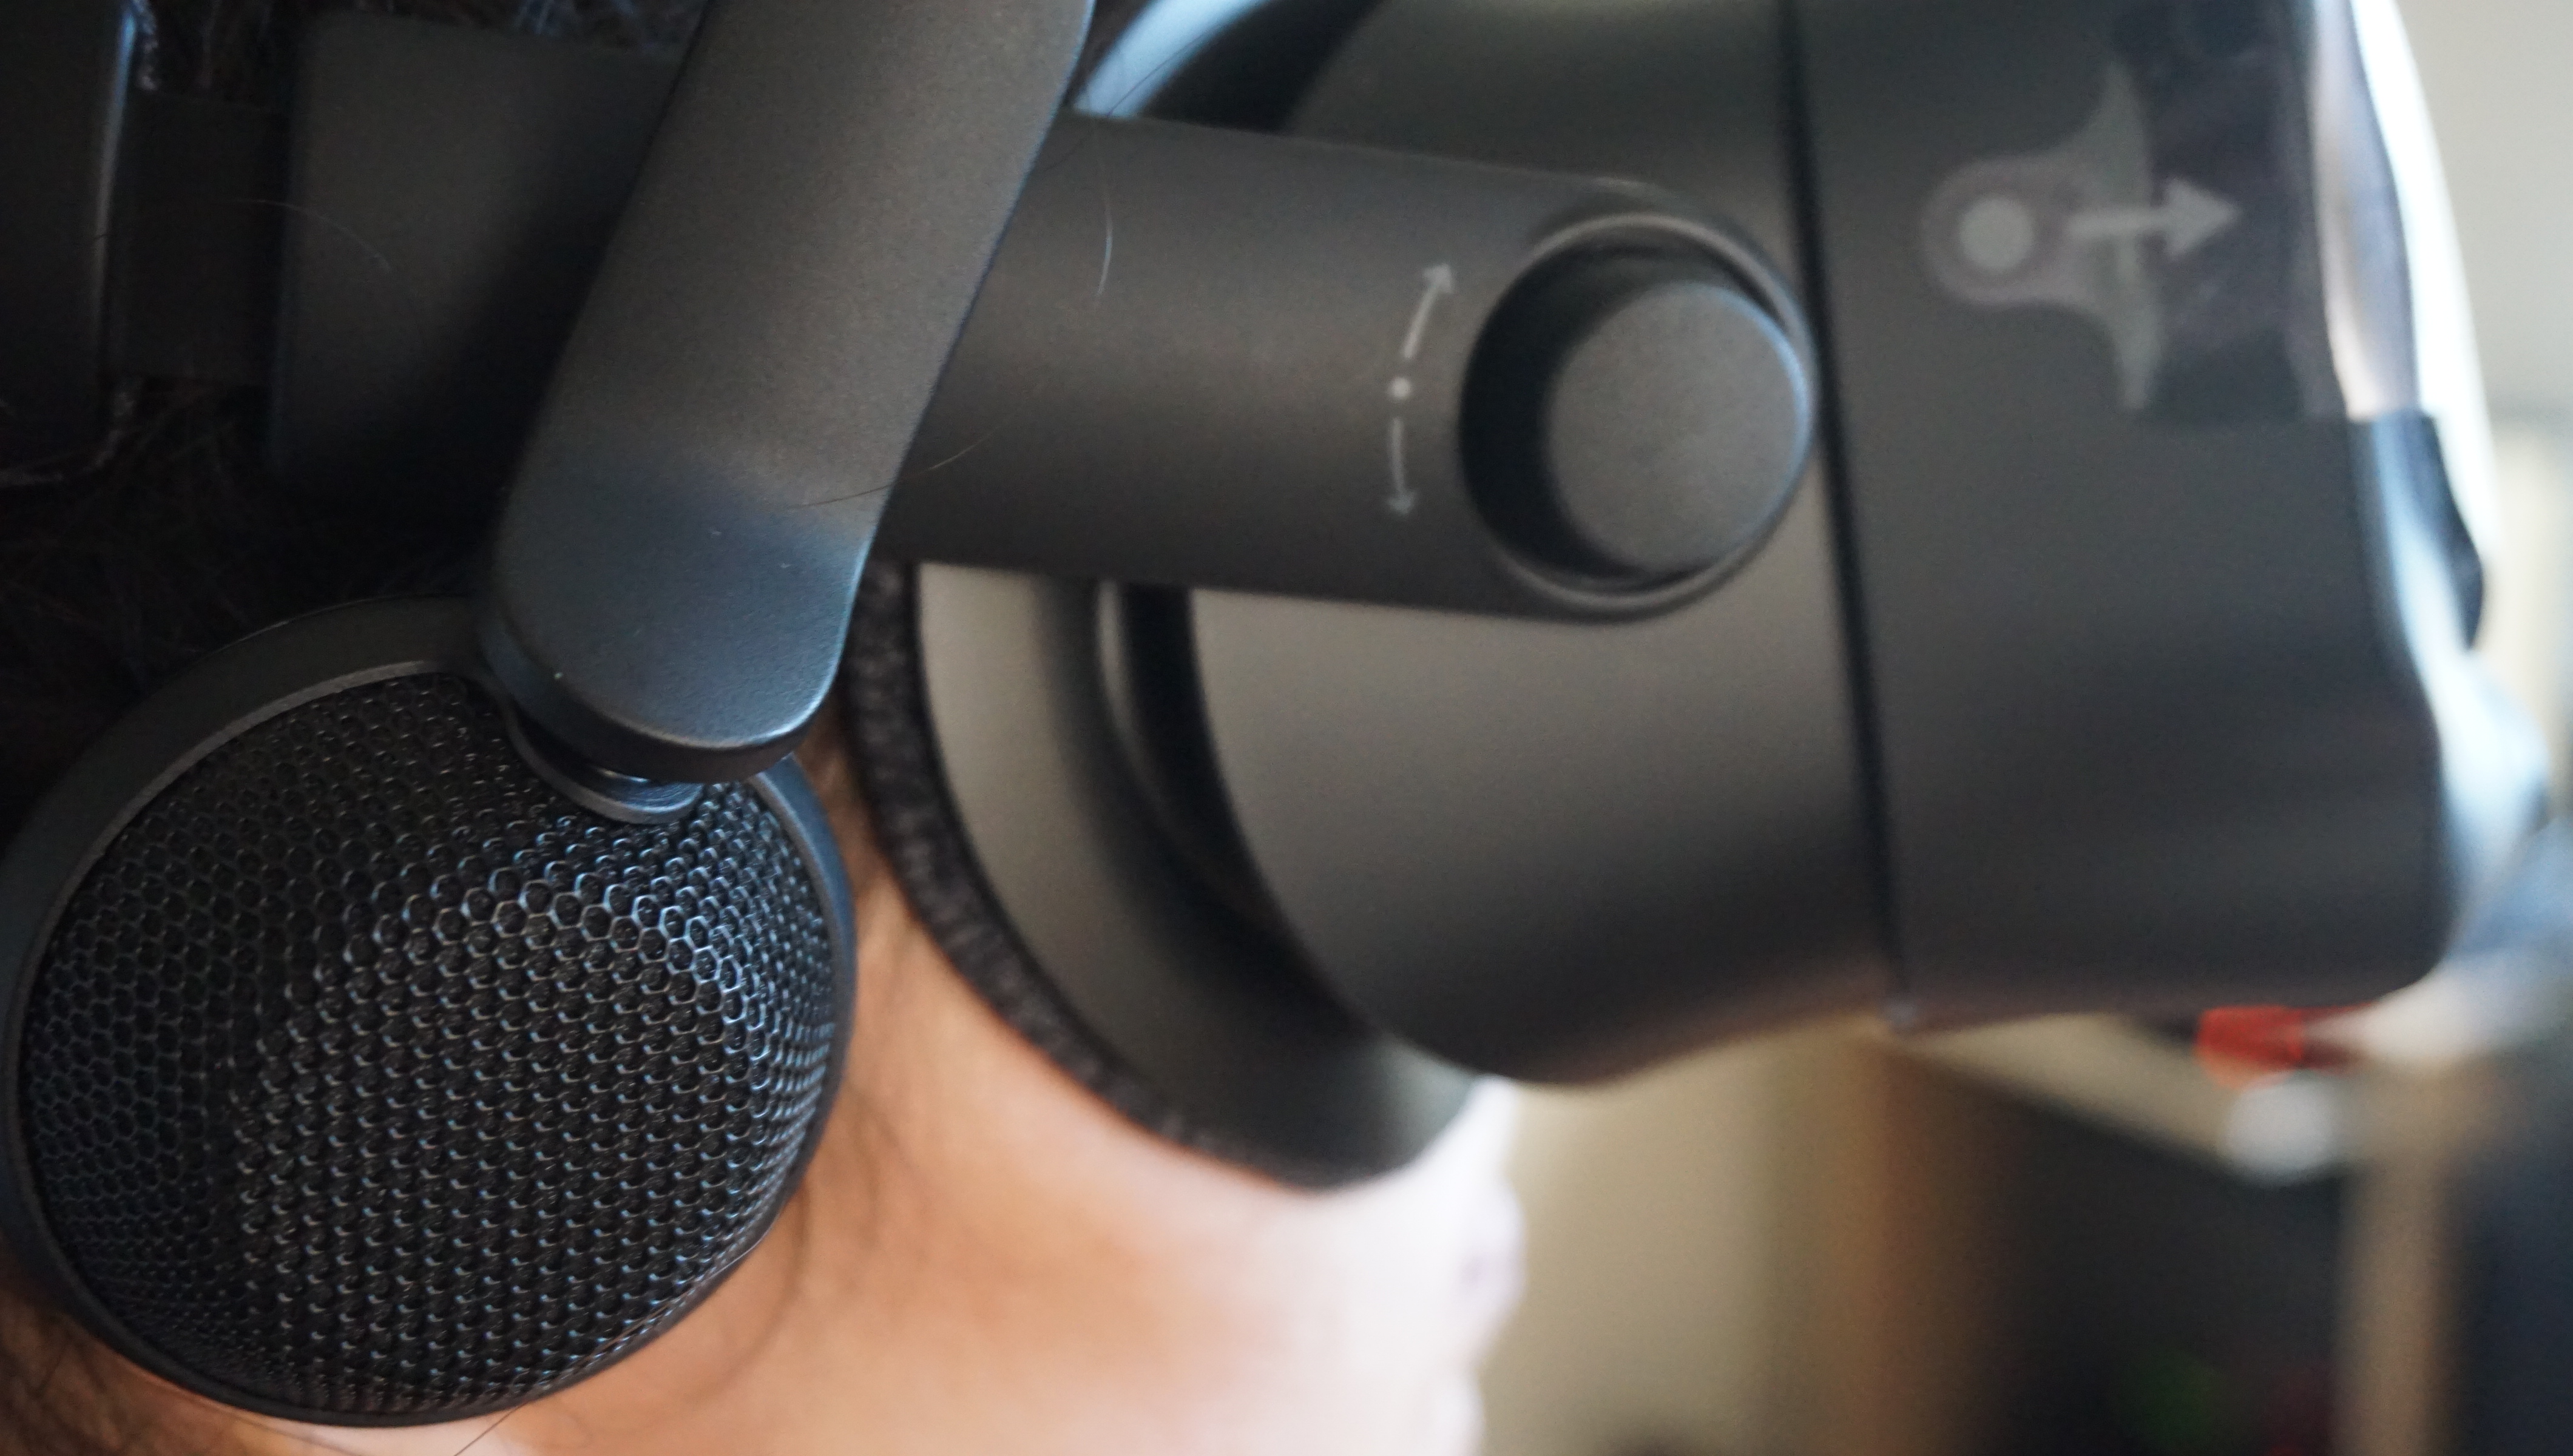 valve index on the side of the headset